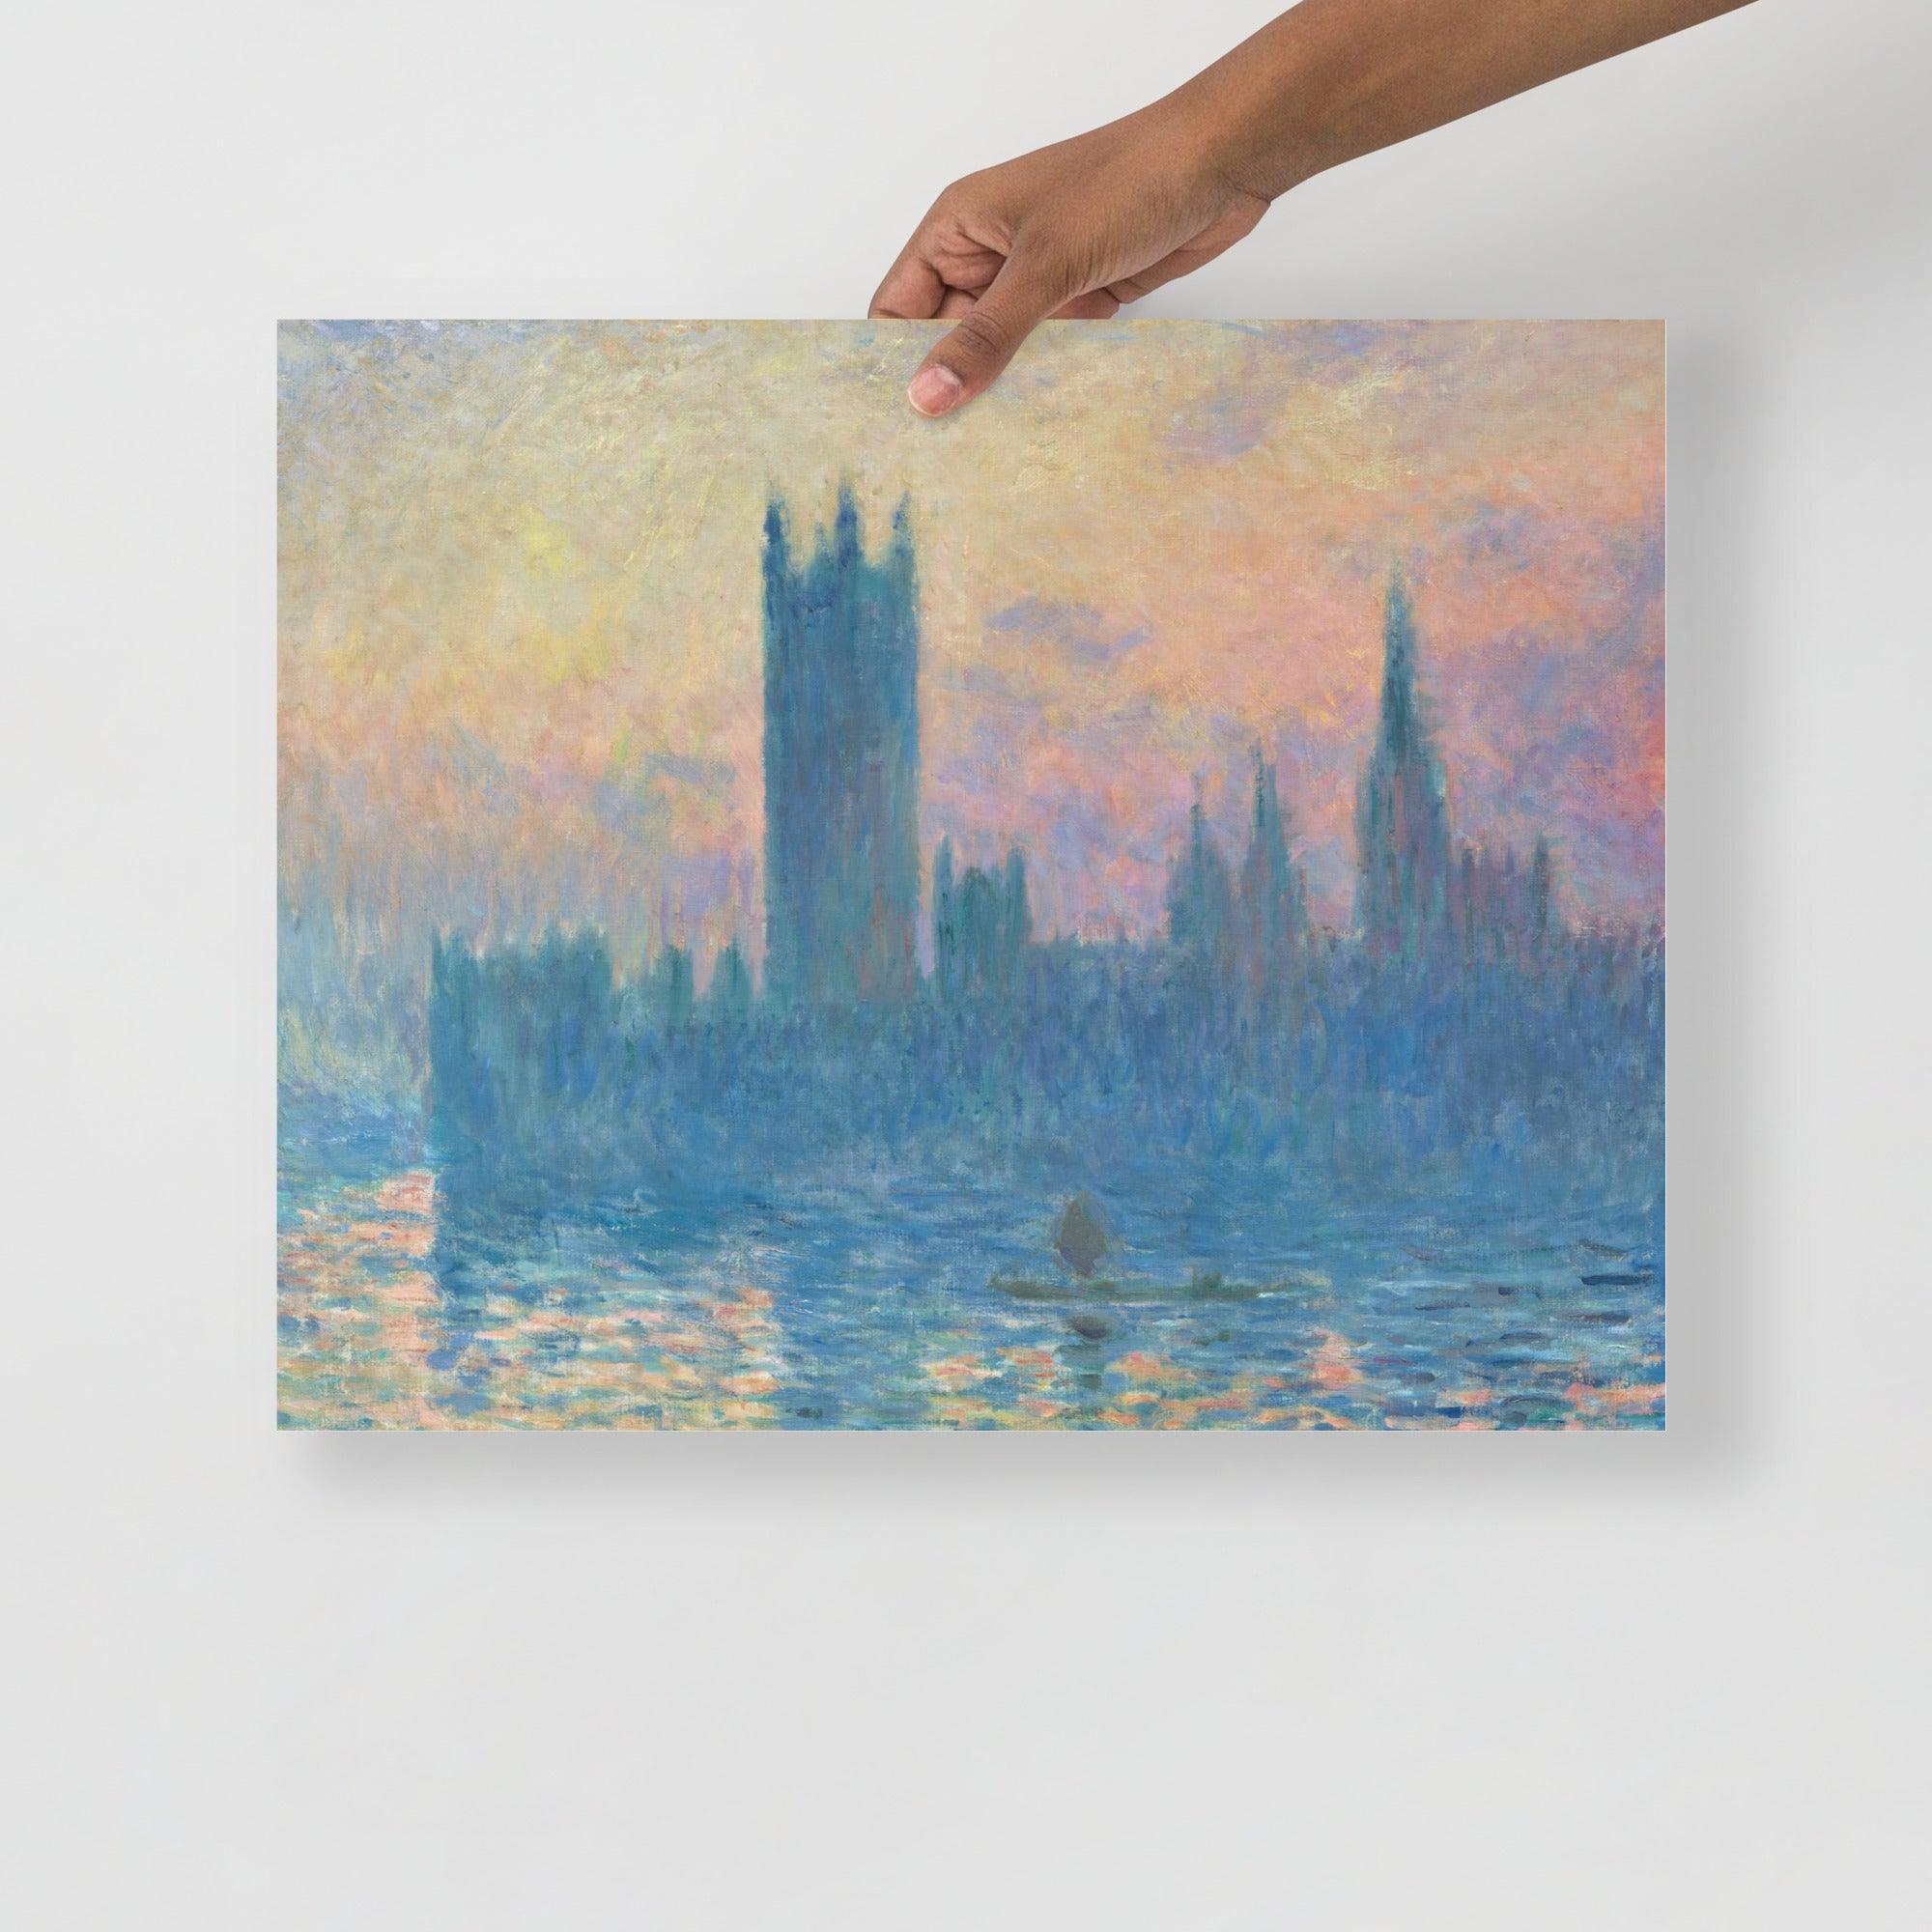 The Houses of Parliament, Sunset by Claude Monet poster on a plain backdrop in size 16x20”.